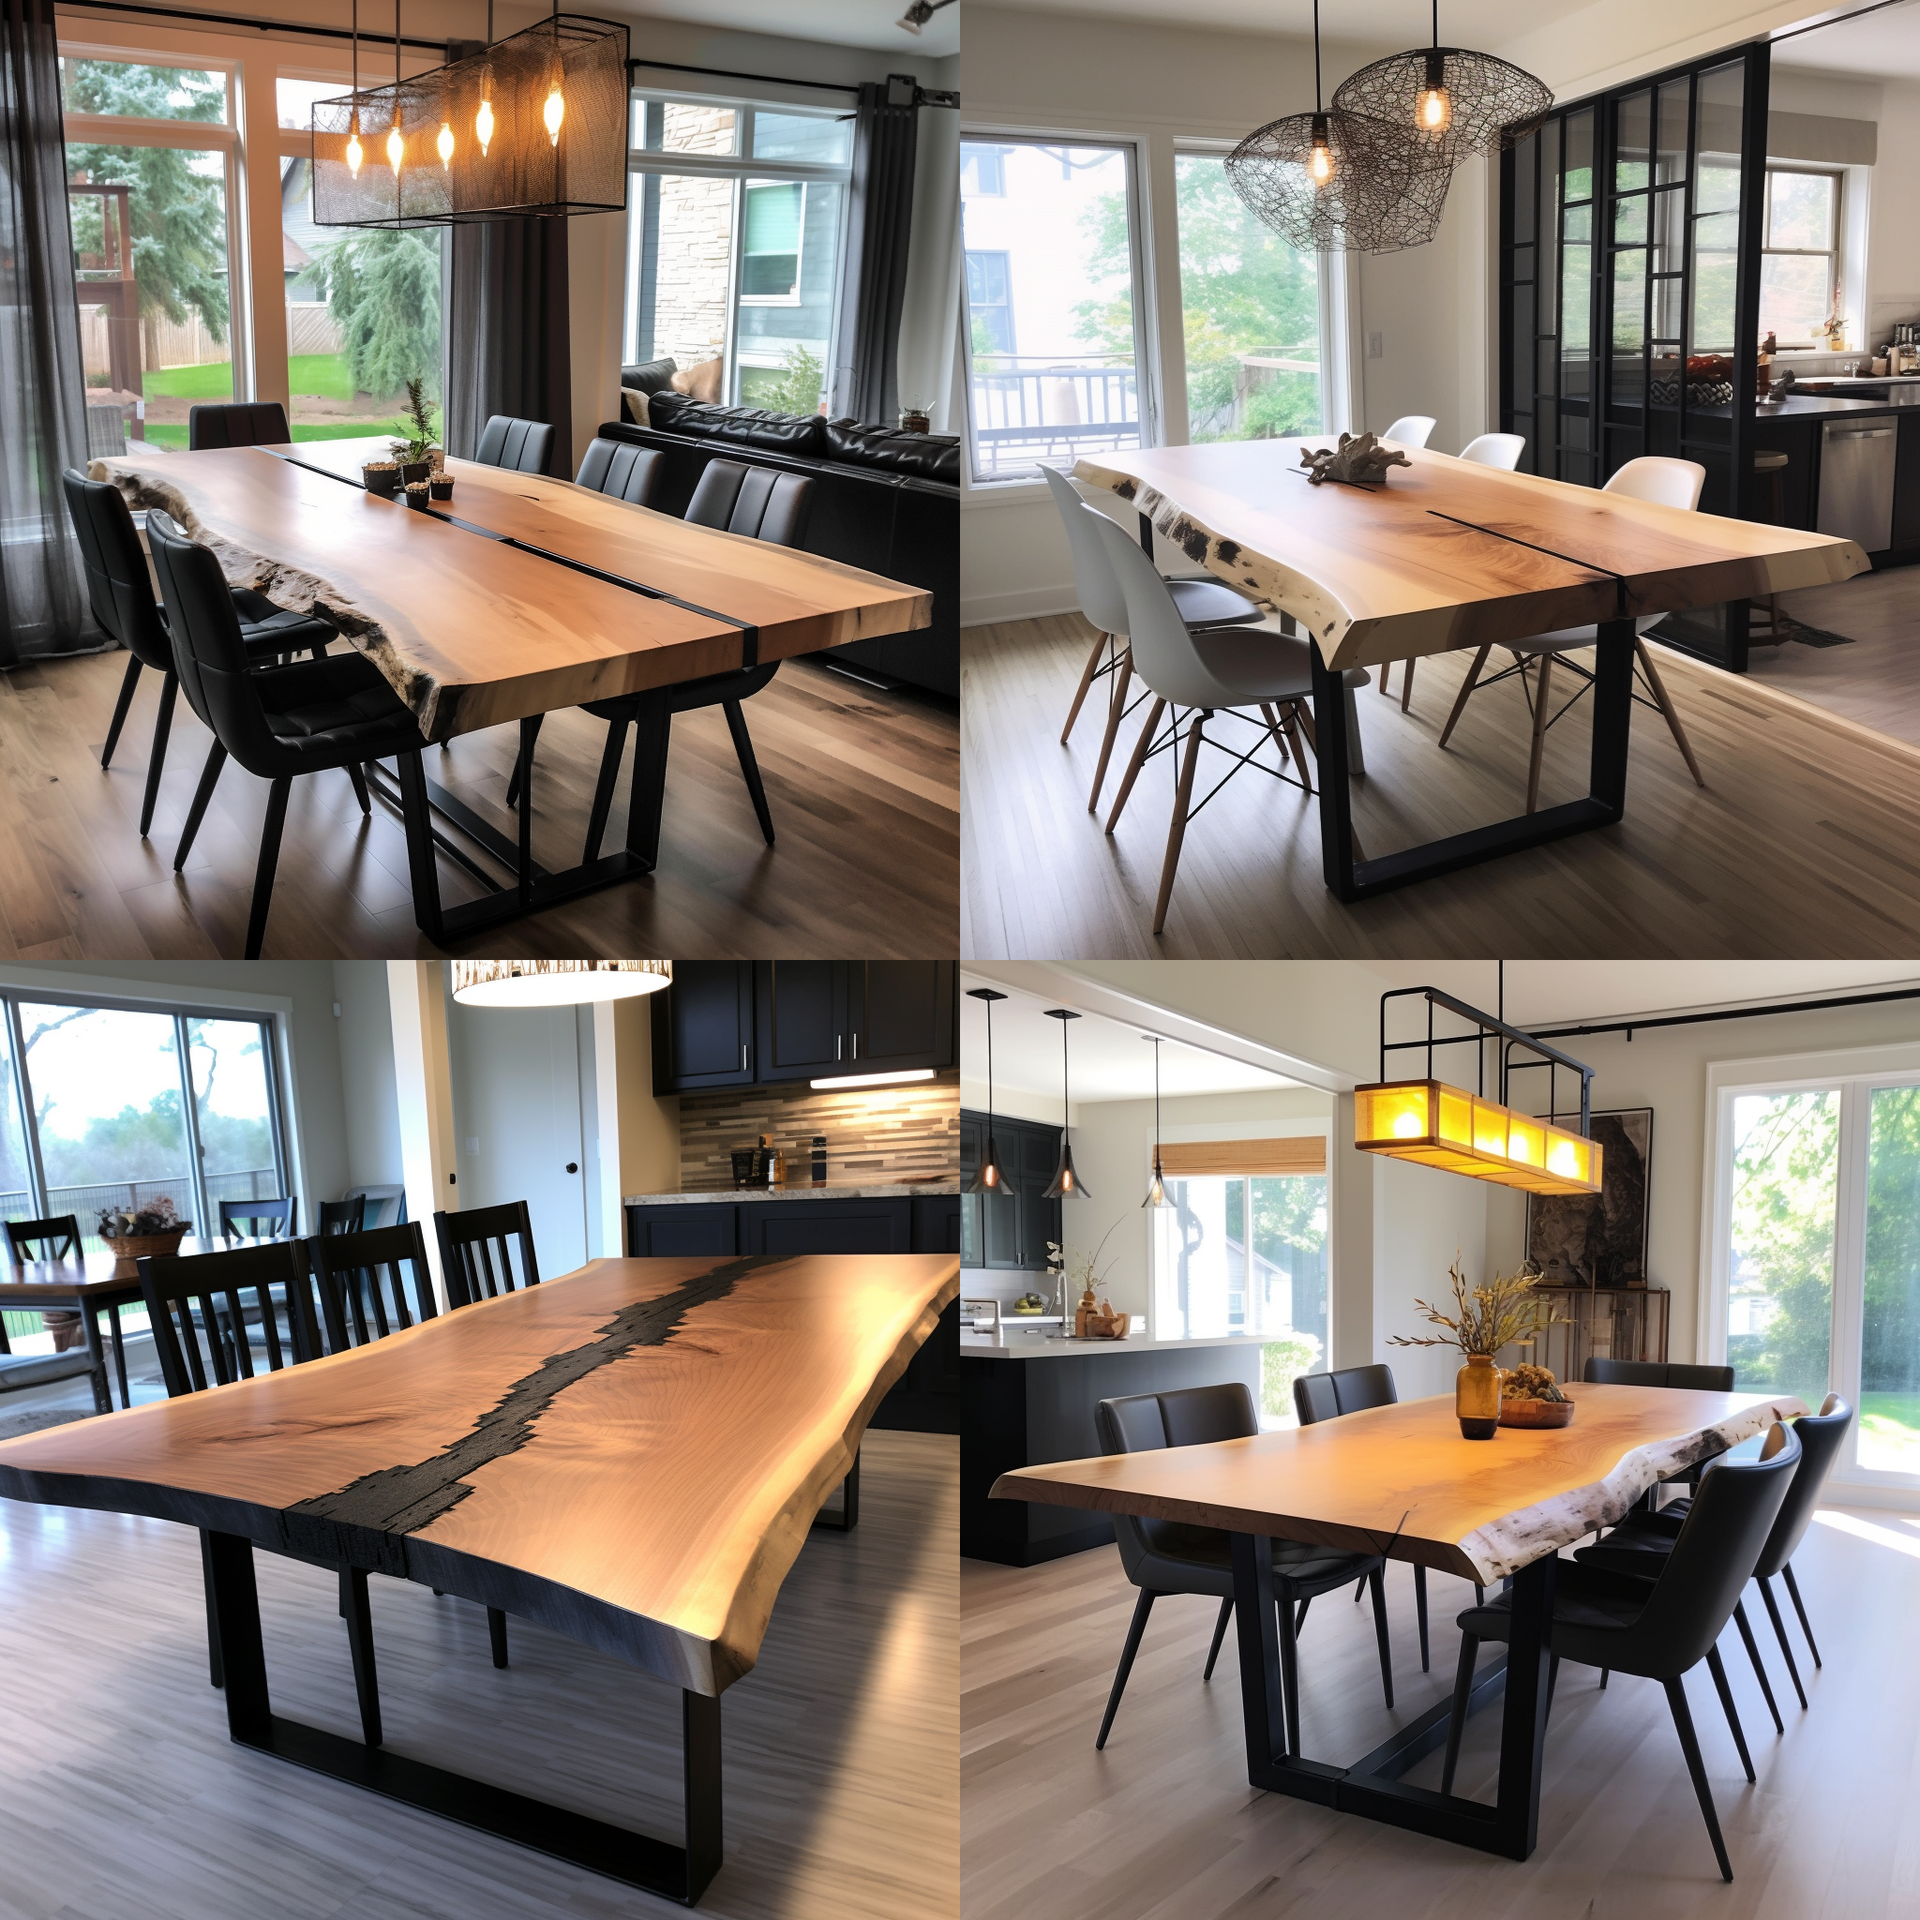 A collage of four pictures of a wooden dining table